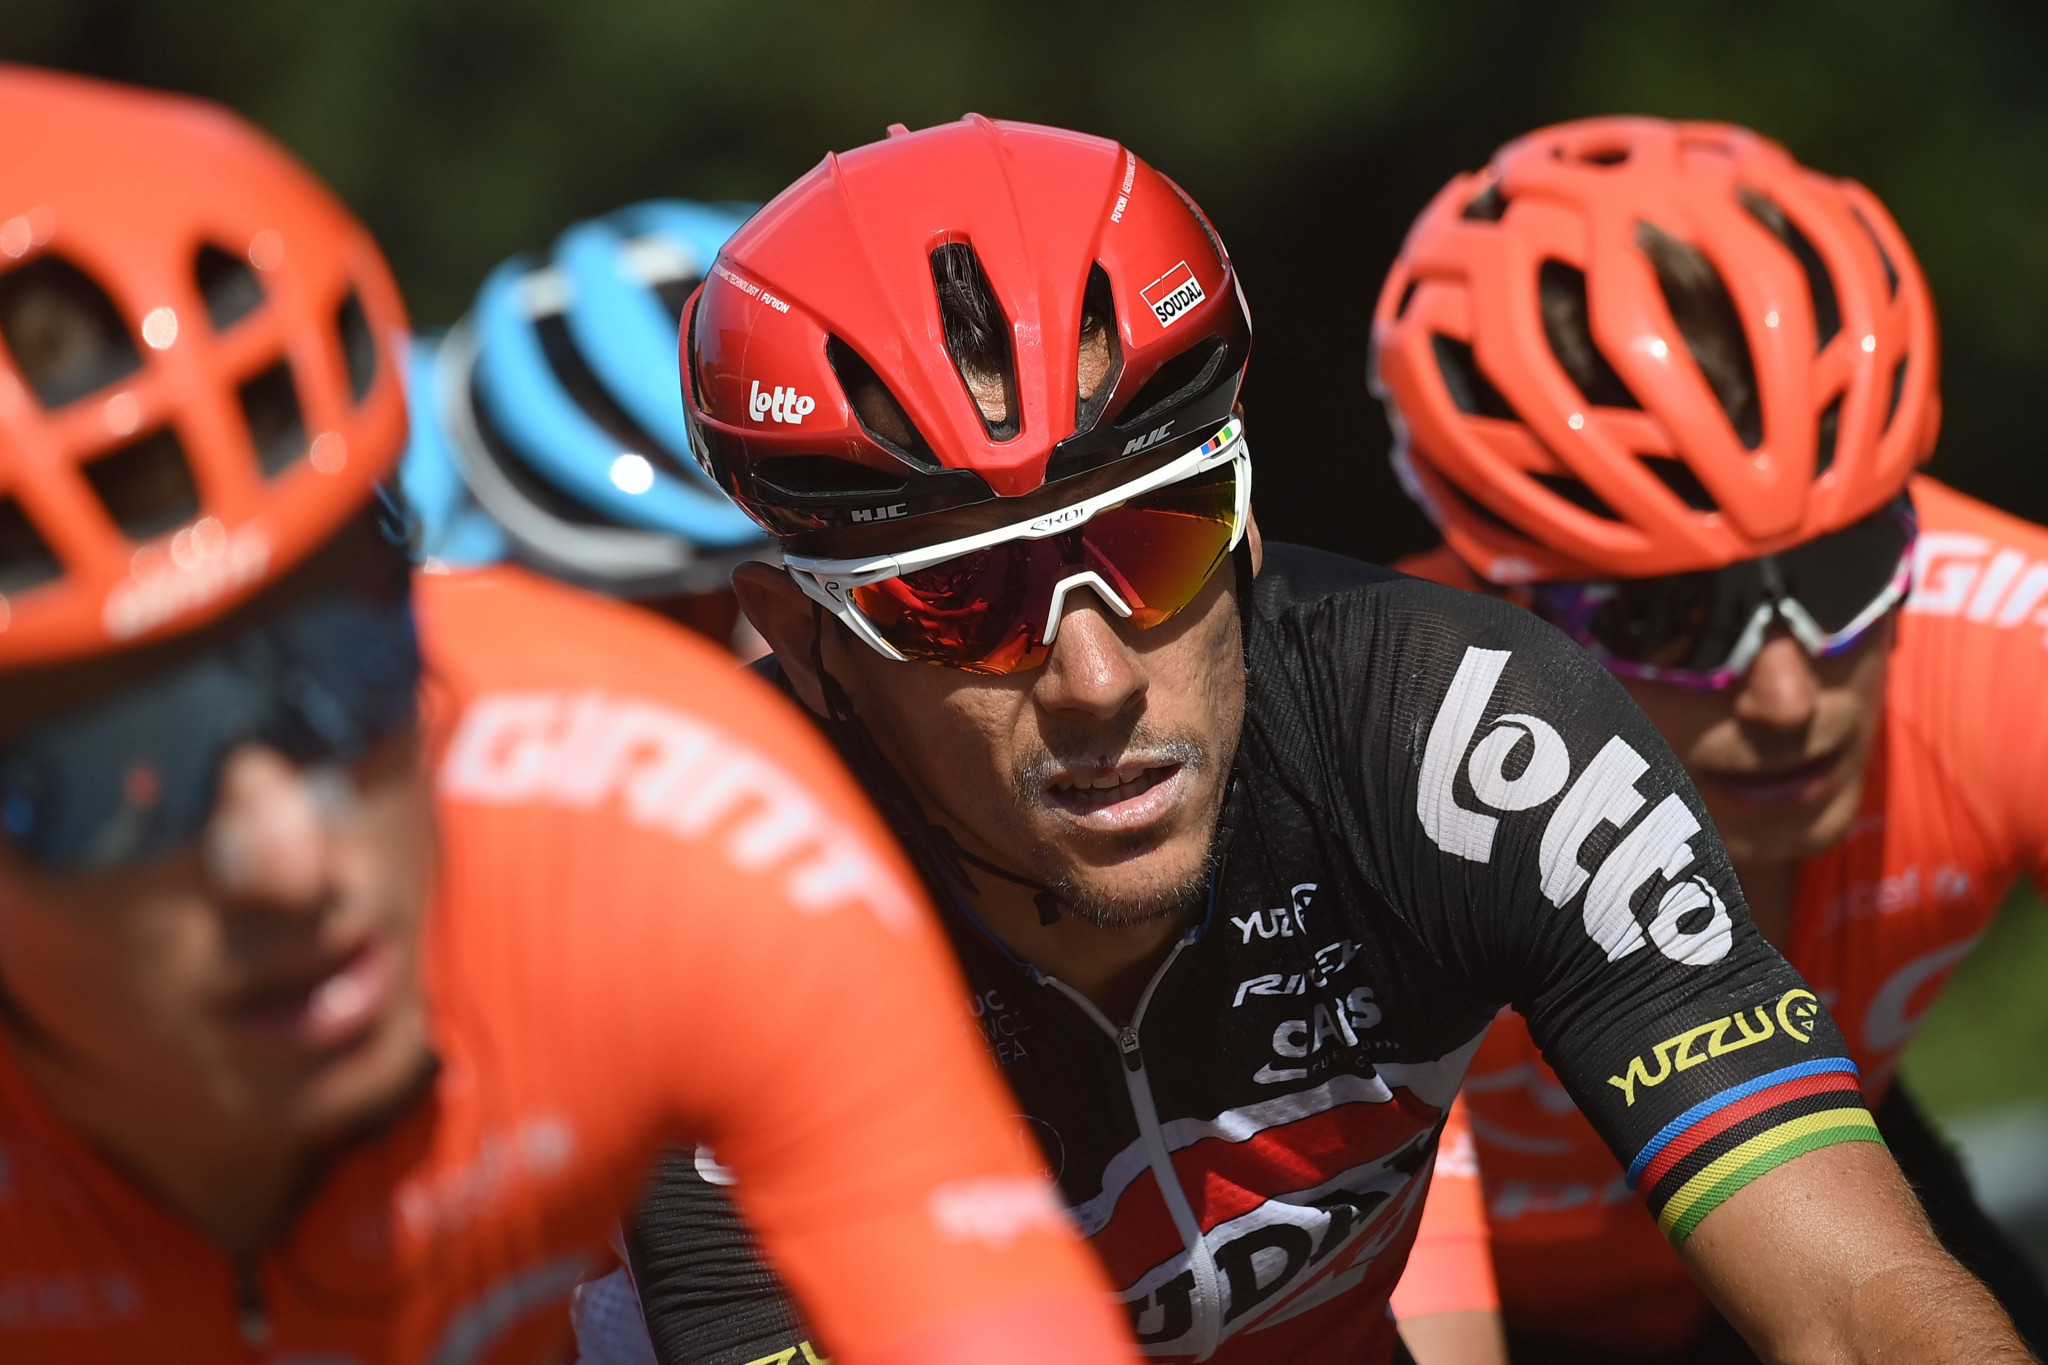 Lotto-Soudal riders Gilbert and Degenkolb out of Tour de France